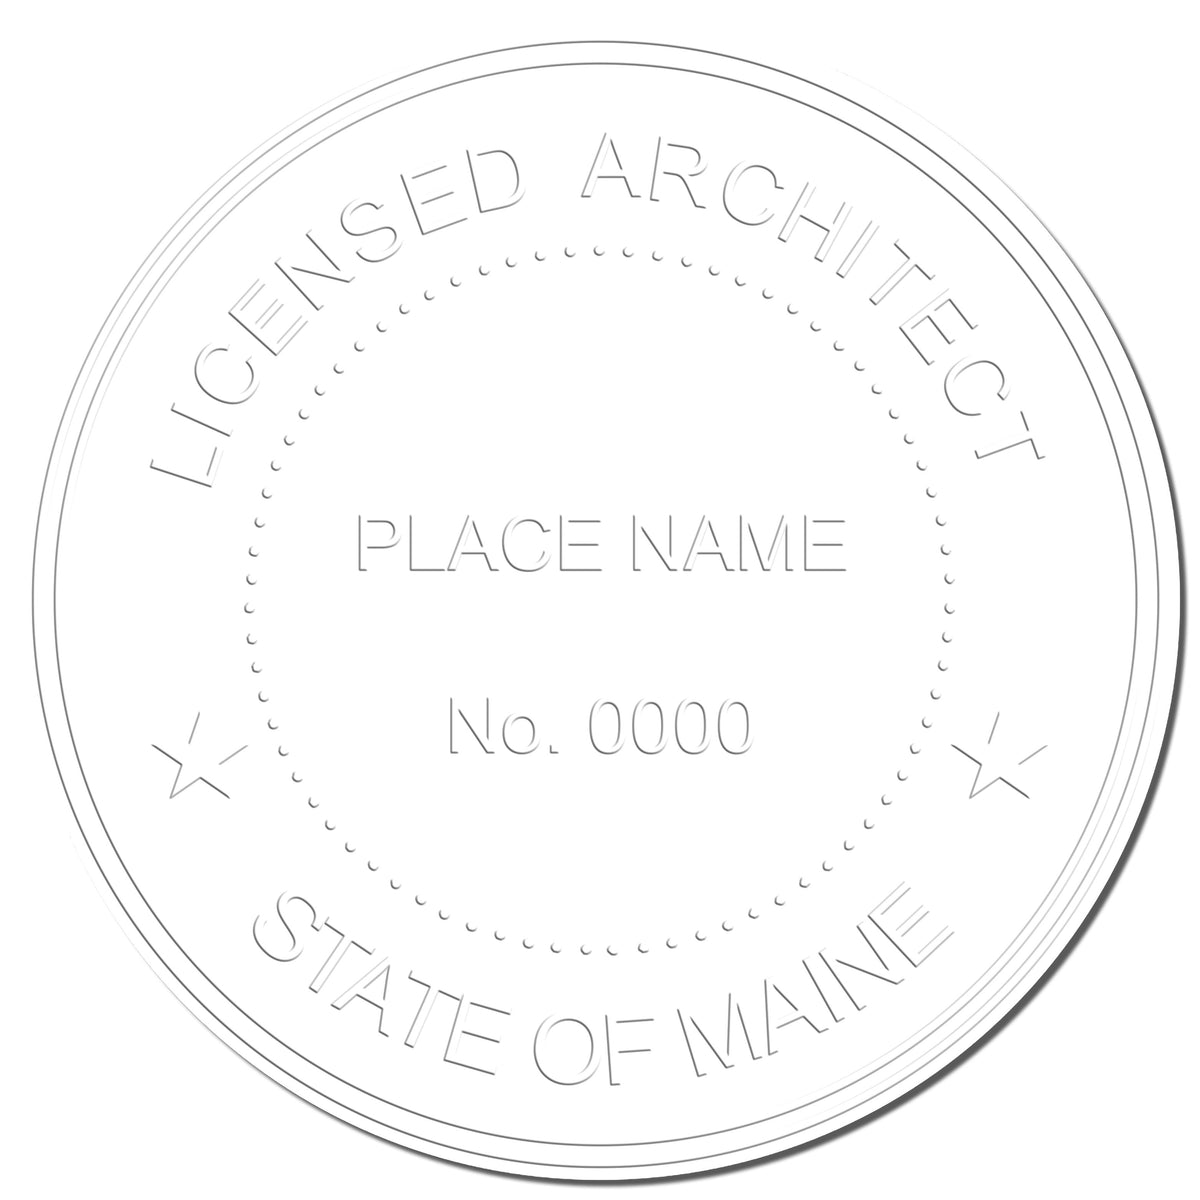 A photograph of the Handheld Maine Architect Seal Embosser stamp impression reveals a vivid, professional image of the on paper.